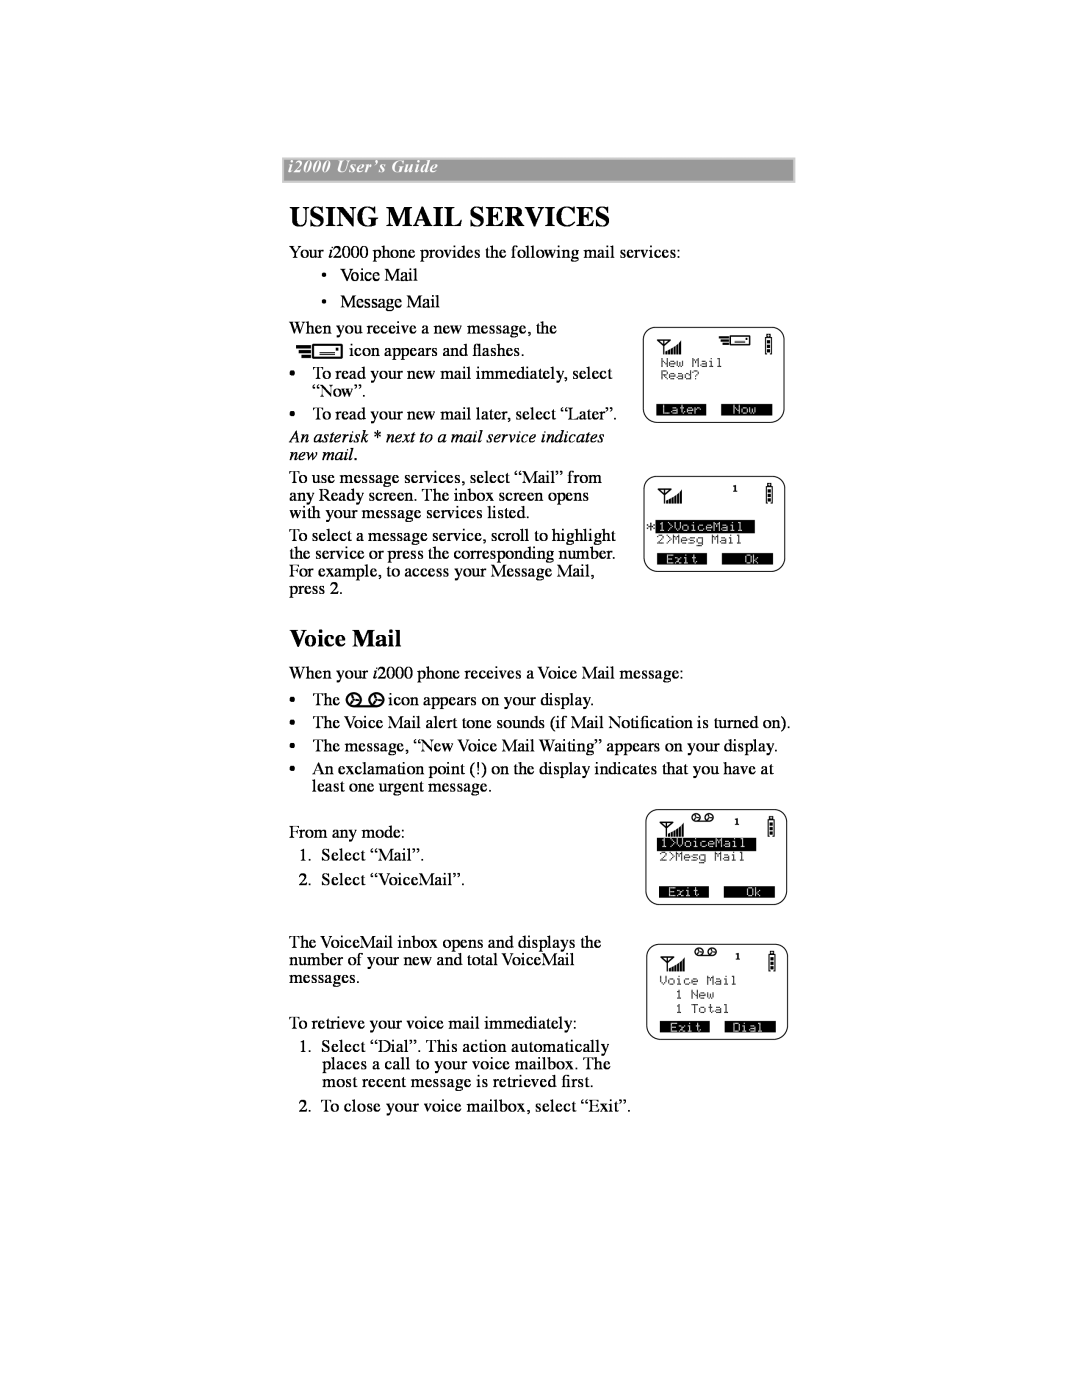 Motorola iDEN Using Mail Services, Voice Mail, An asterisk * next to a mail service indicates new mail, i2000 UserÕs Guide 